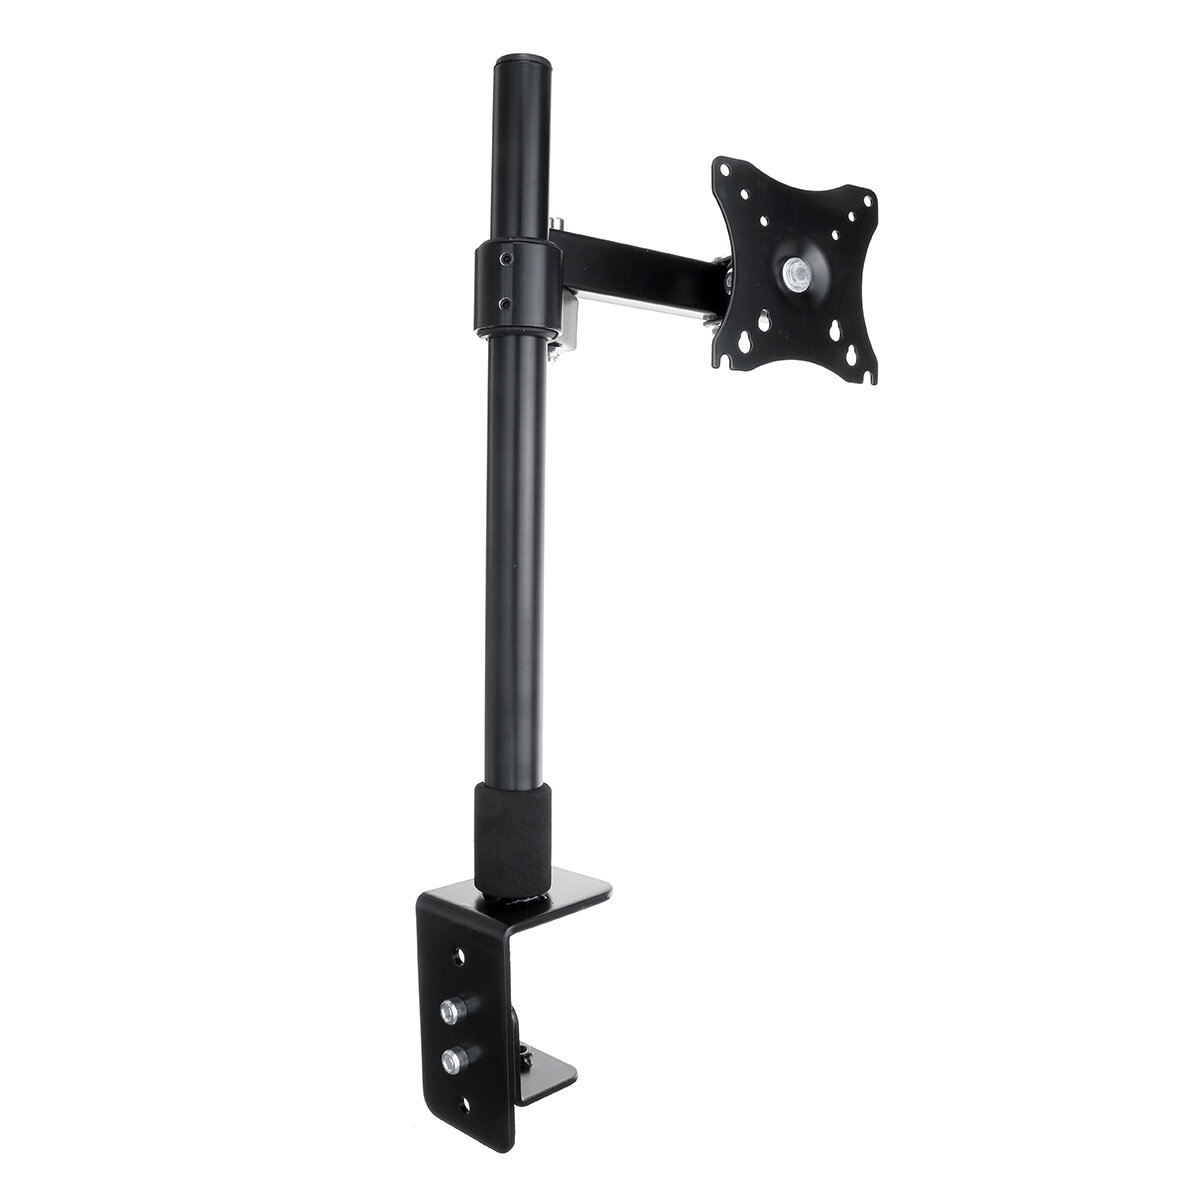 Single Arm Desk Mount LCD Computer Monitor Bracket Clamp Stand 14-27 inch Screen TV Bracket